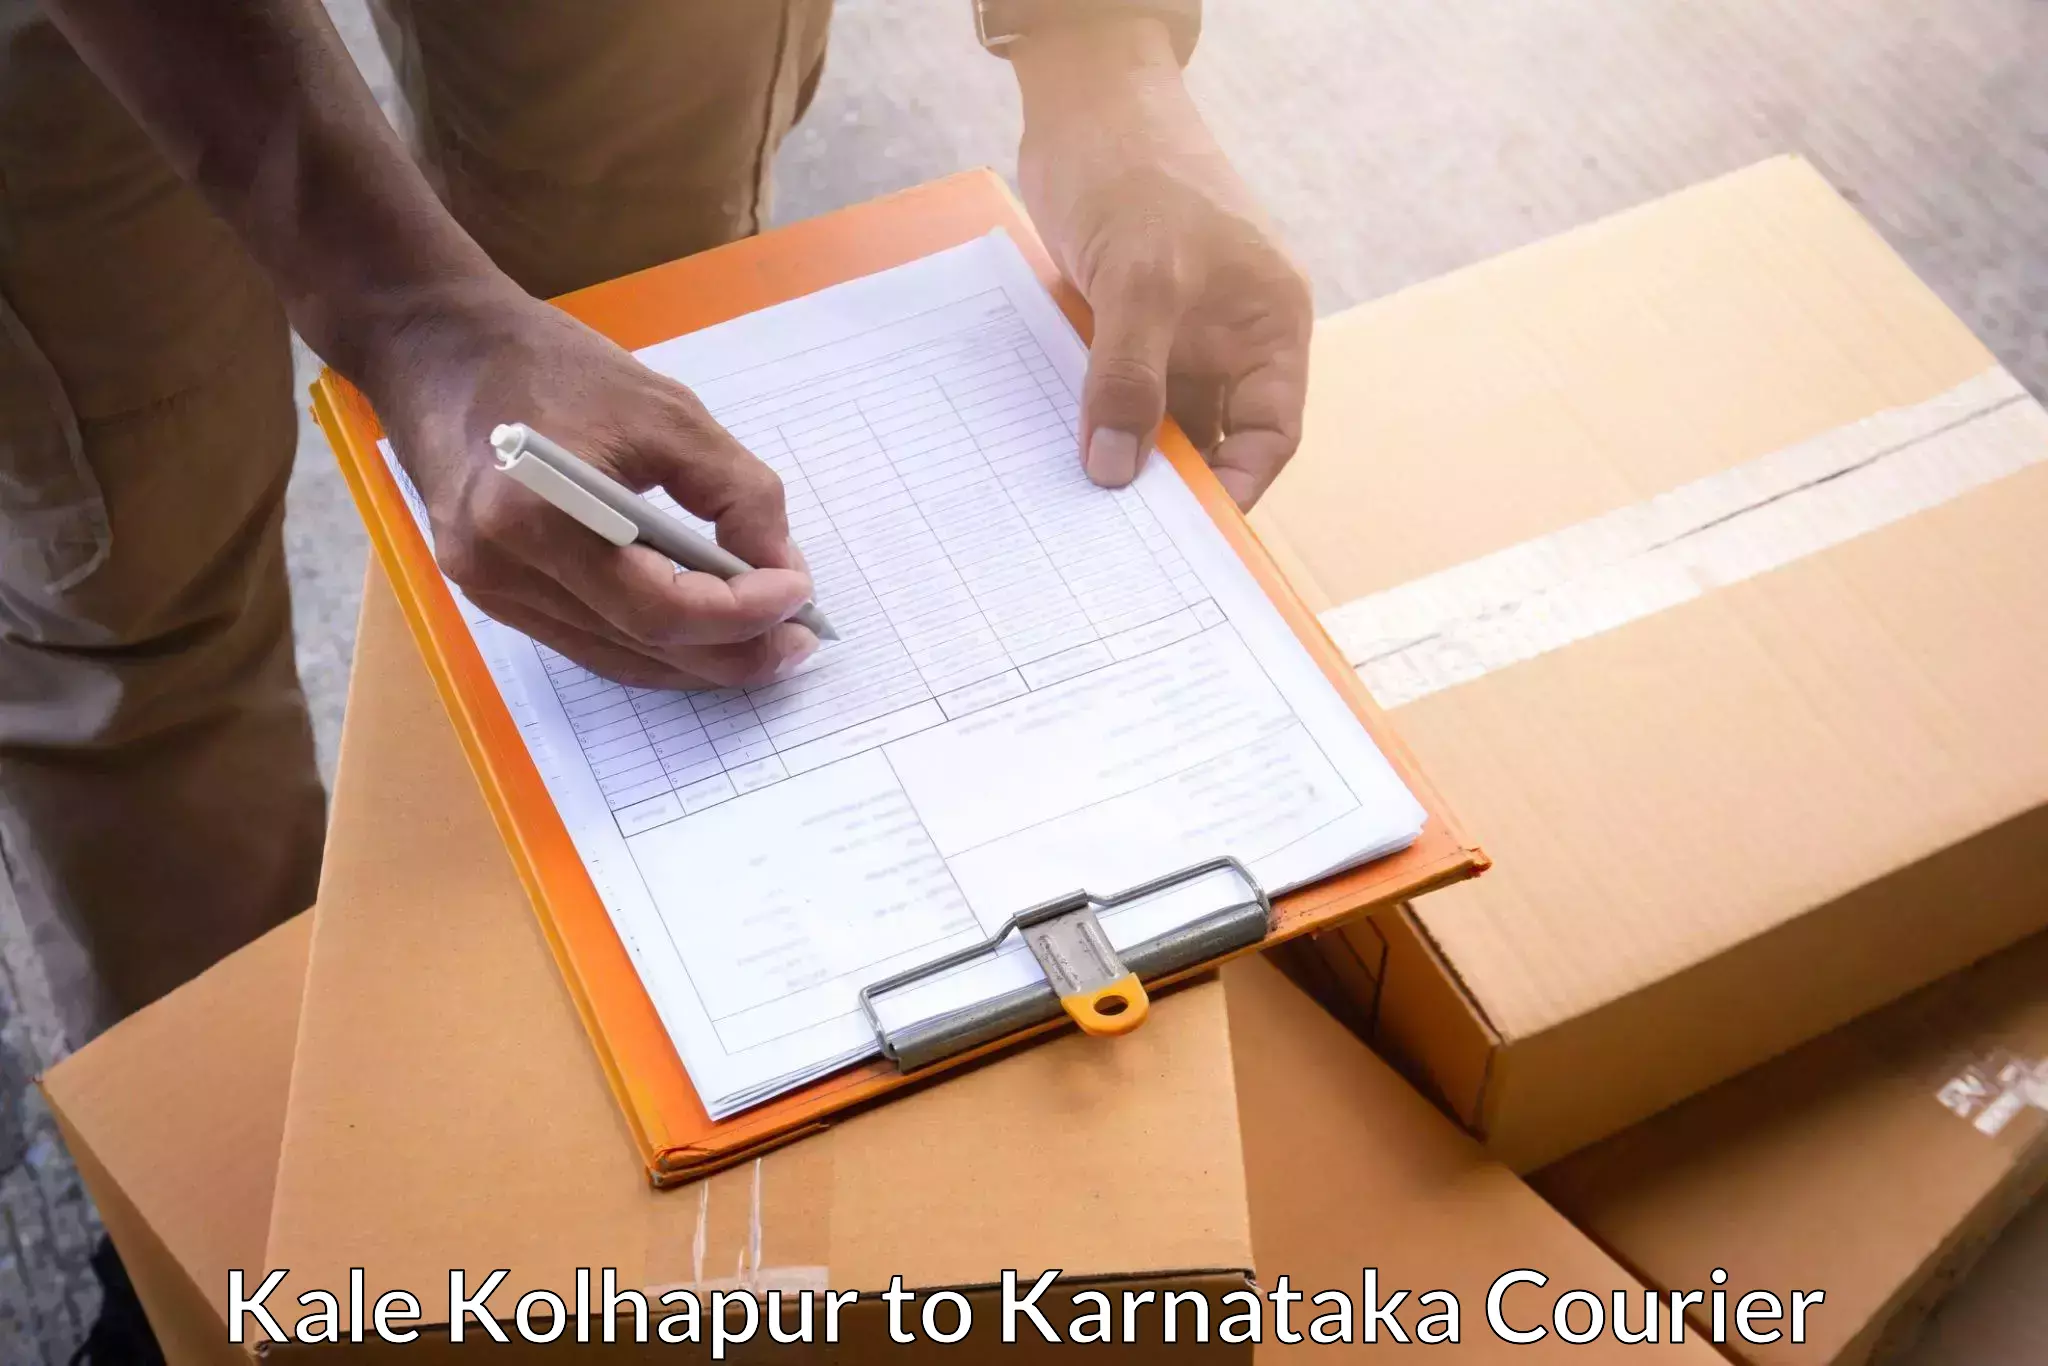 Efficient courier operations in Kale Kolhapur to Chamarajanagar